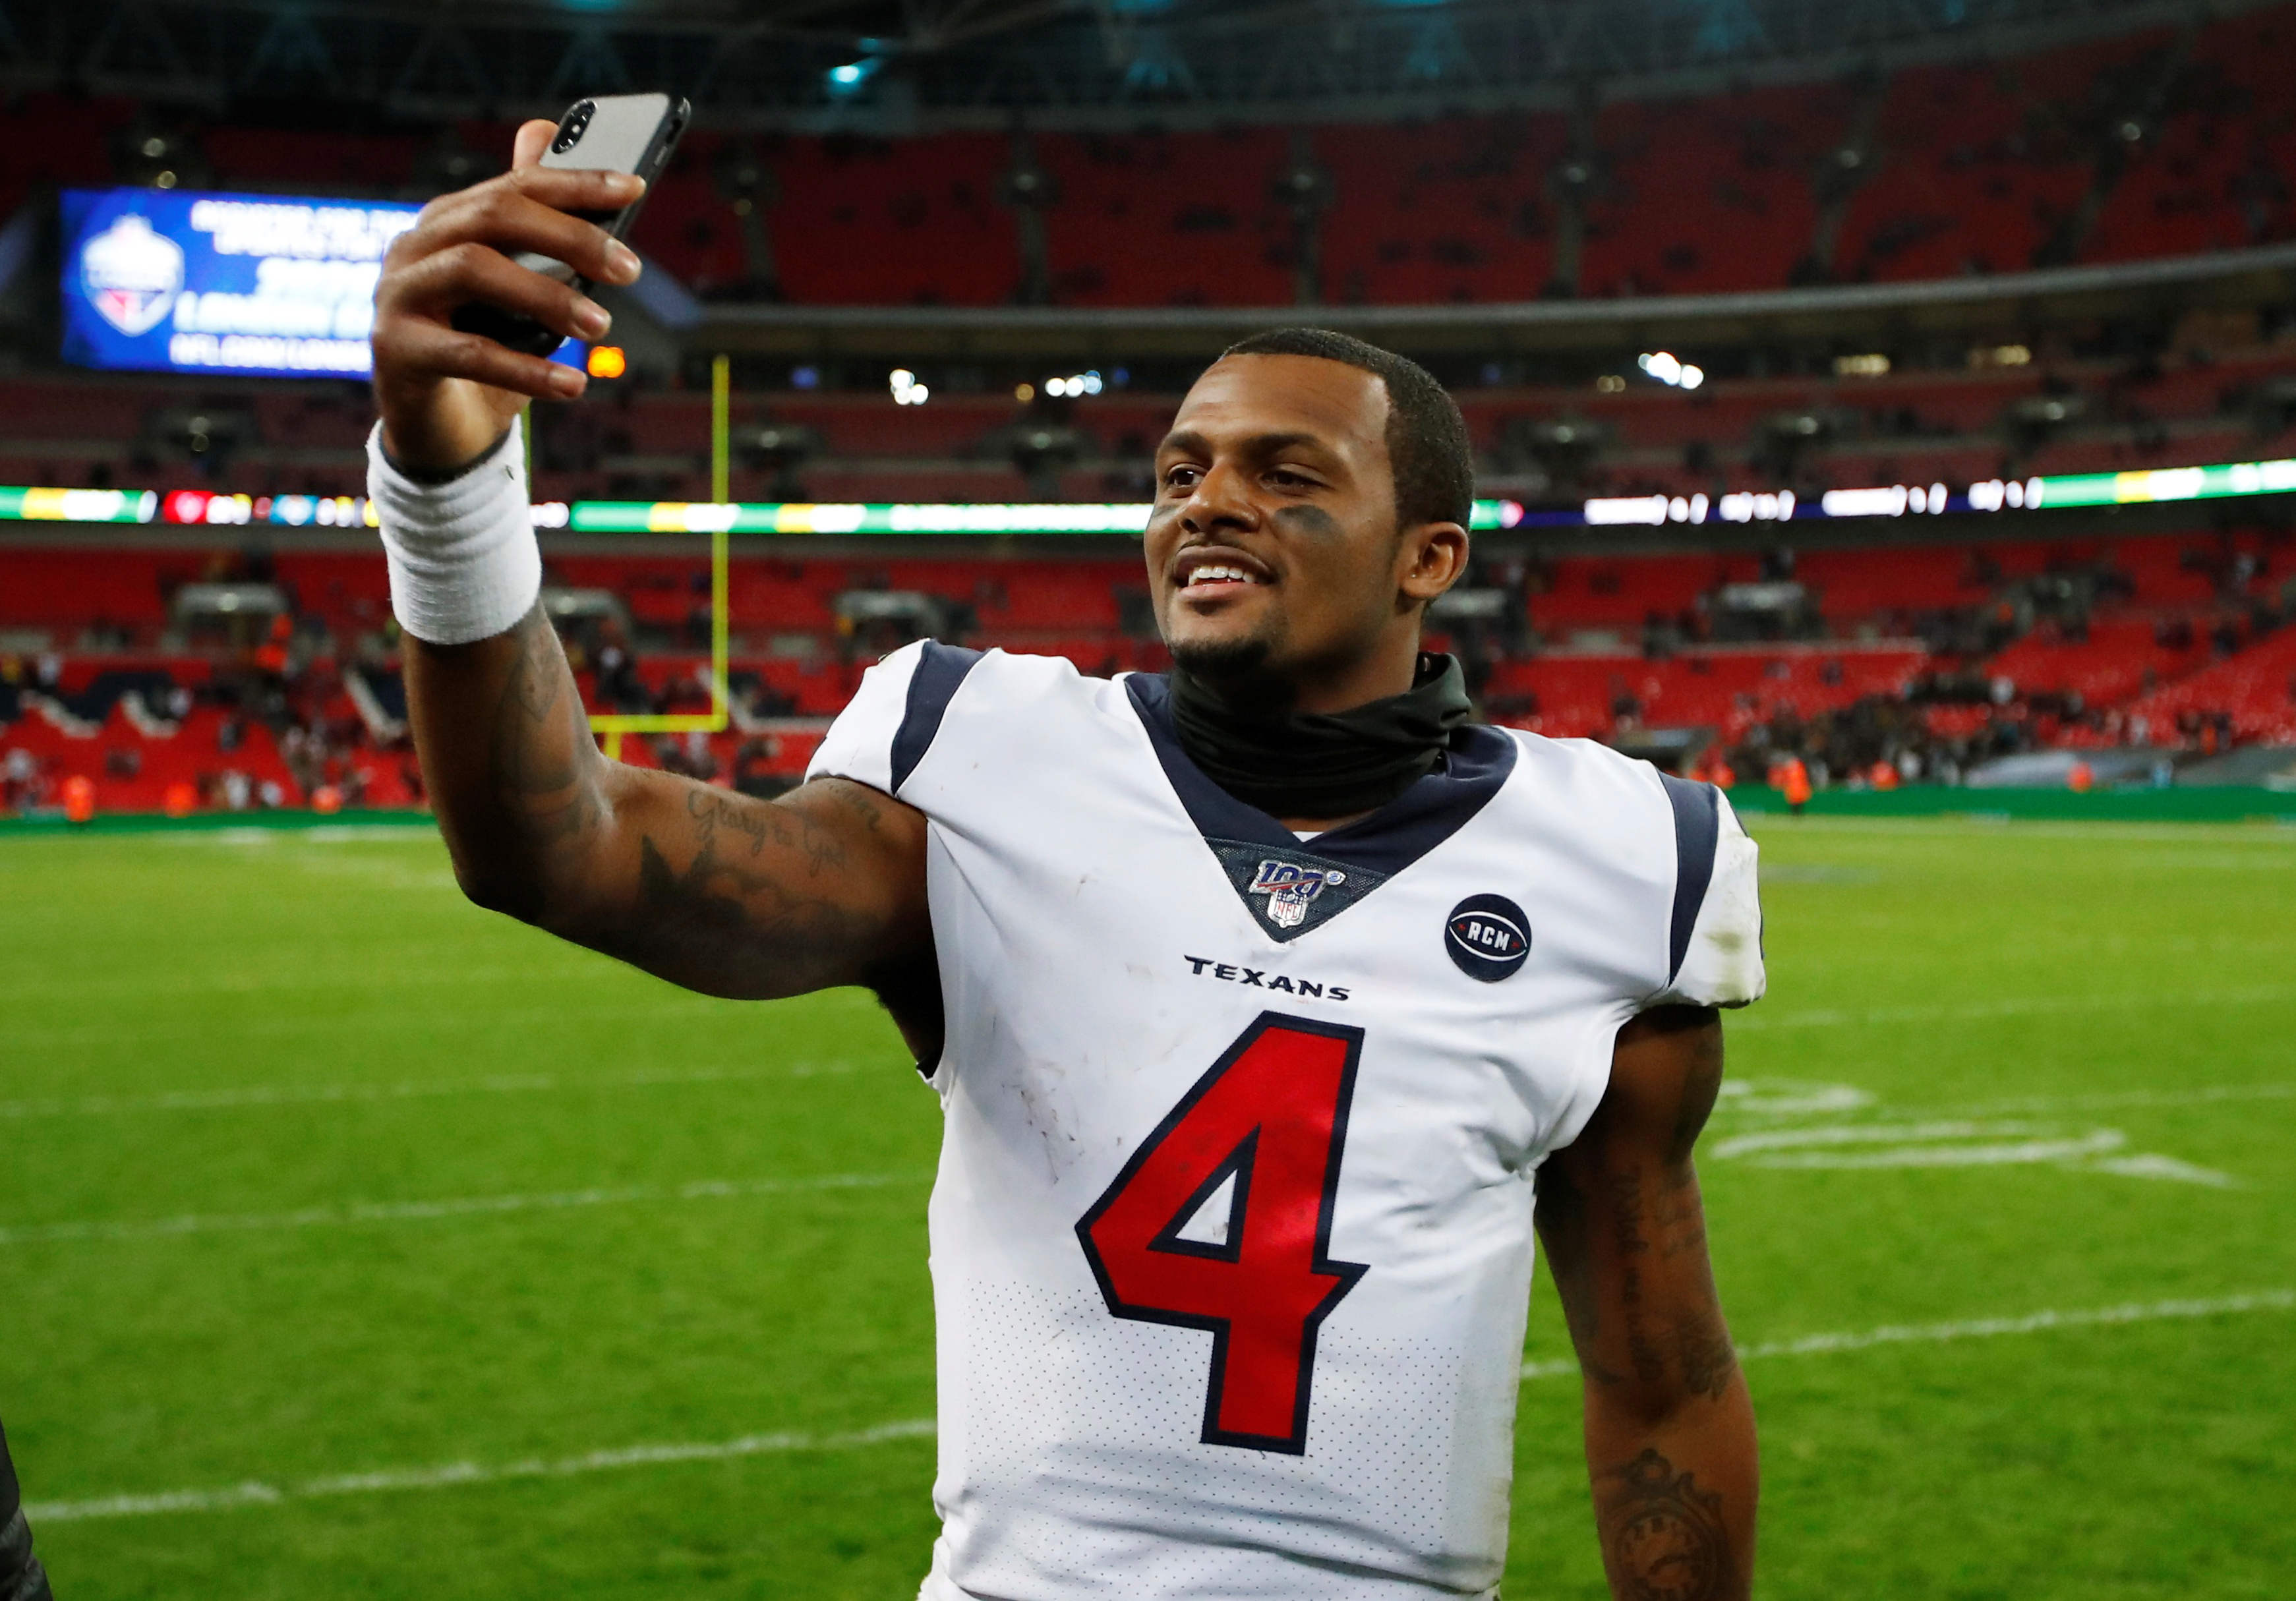 Deshaun Watson denies assault allegations in first news conference with Cleveland Browns